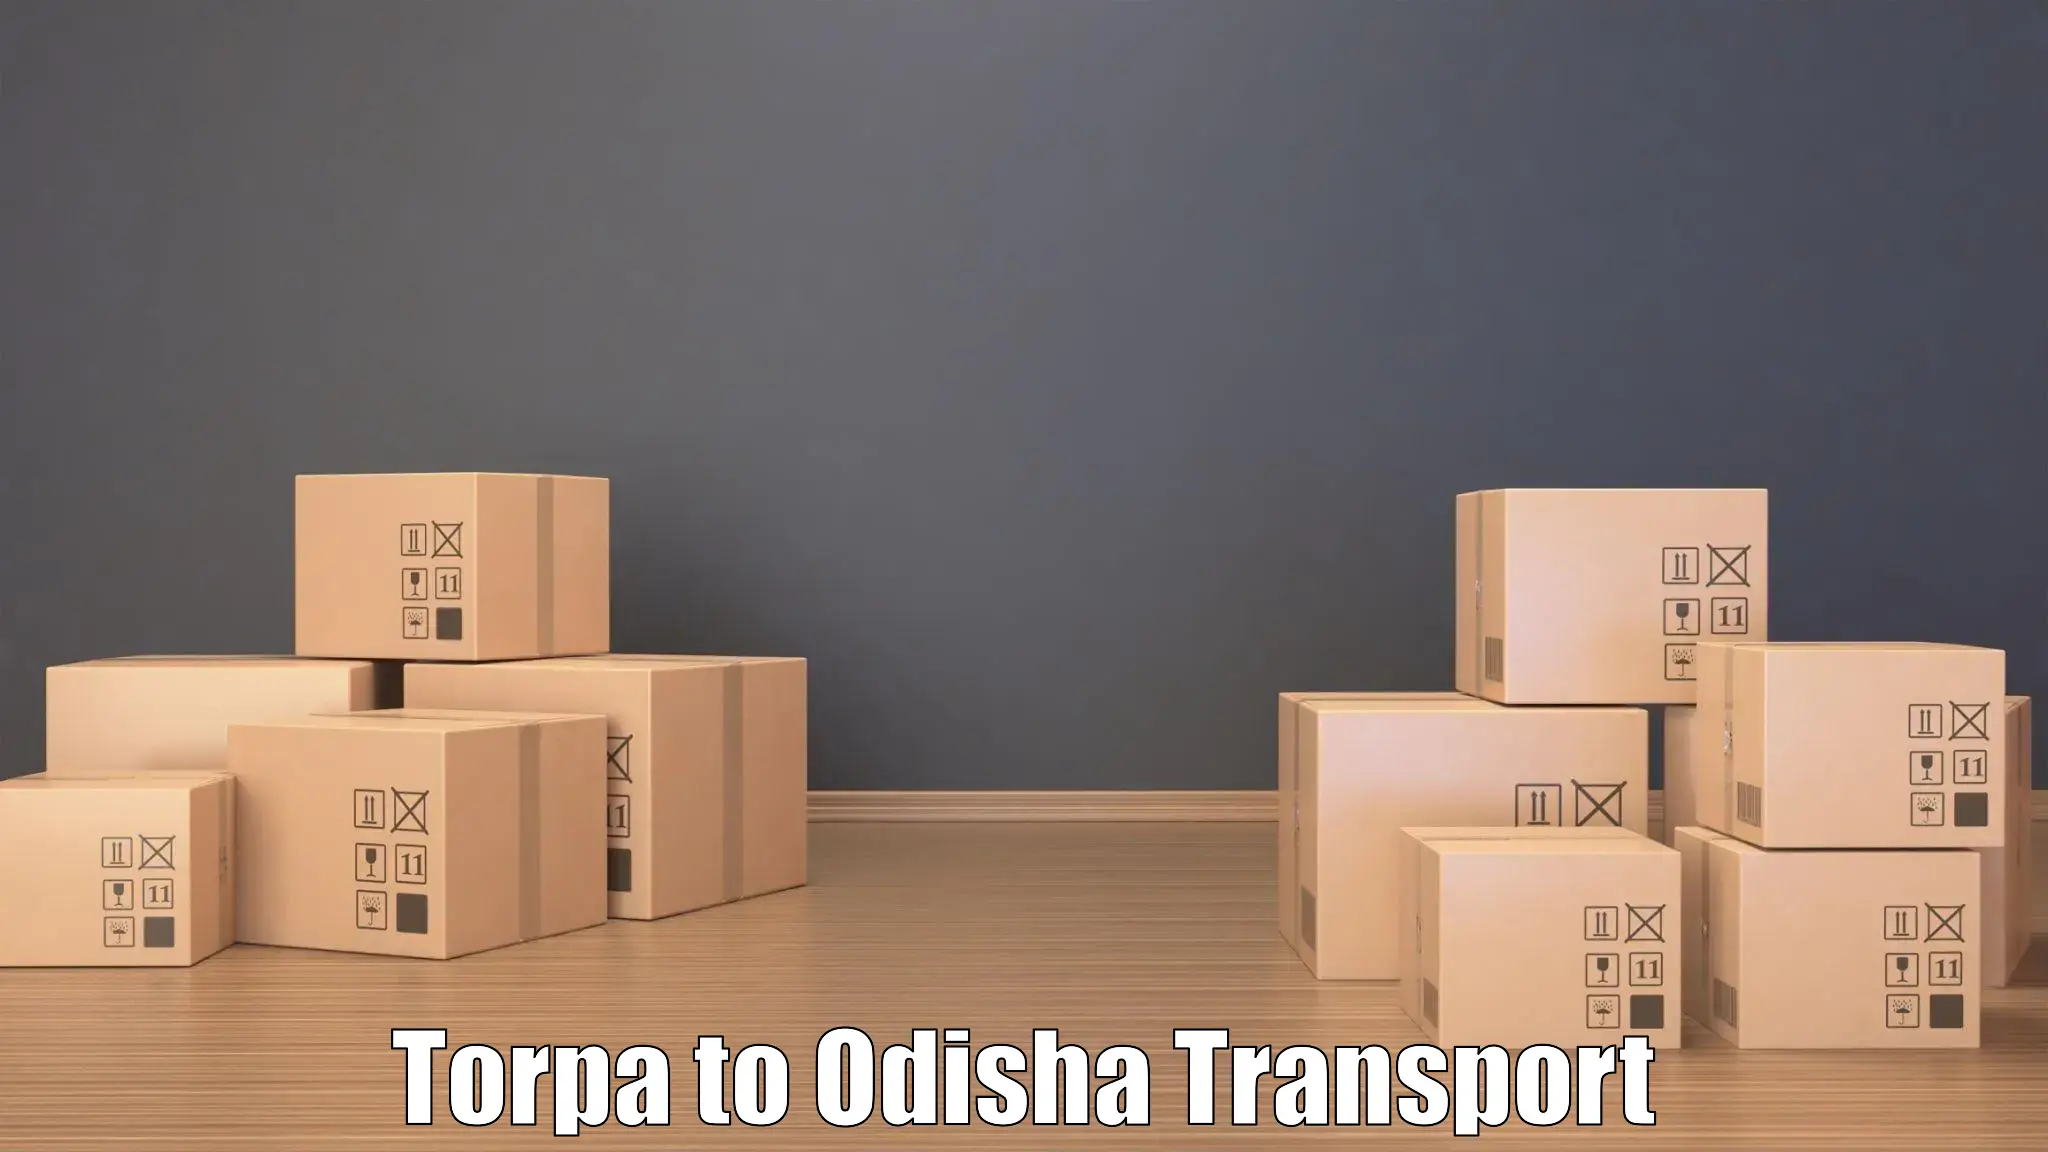 Road transport online services Torpa to Loisingha